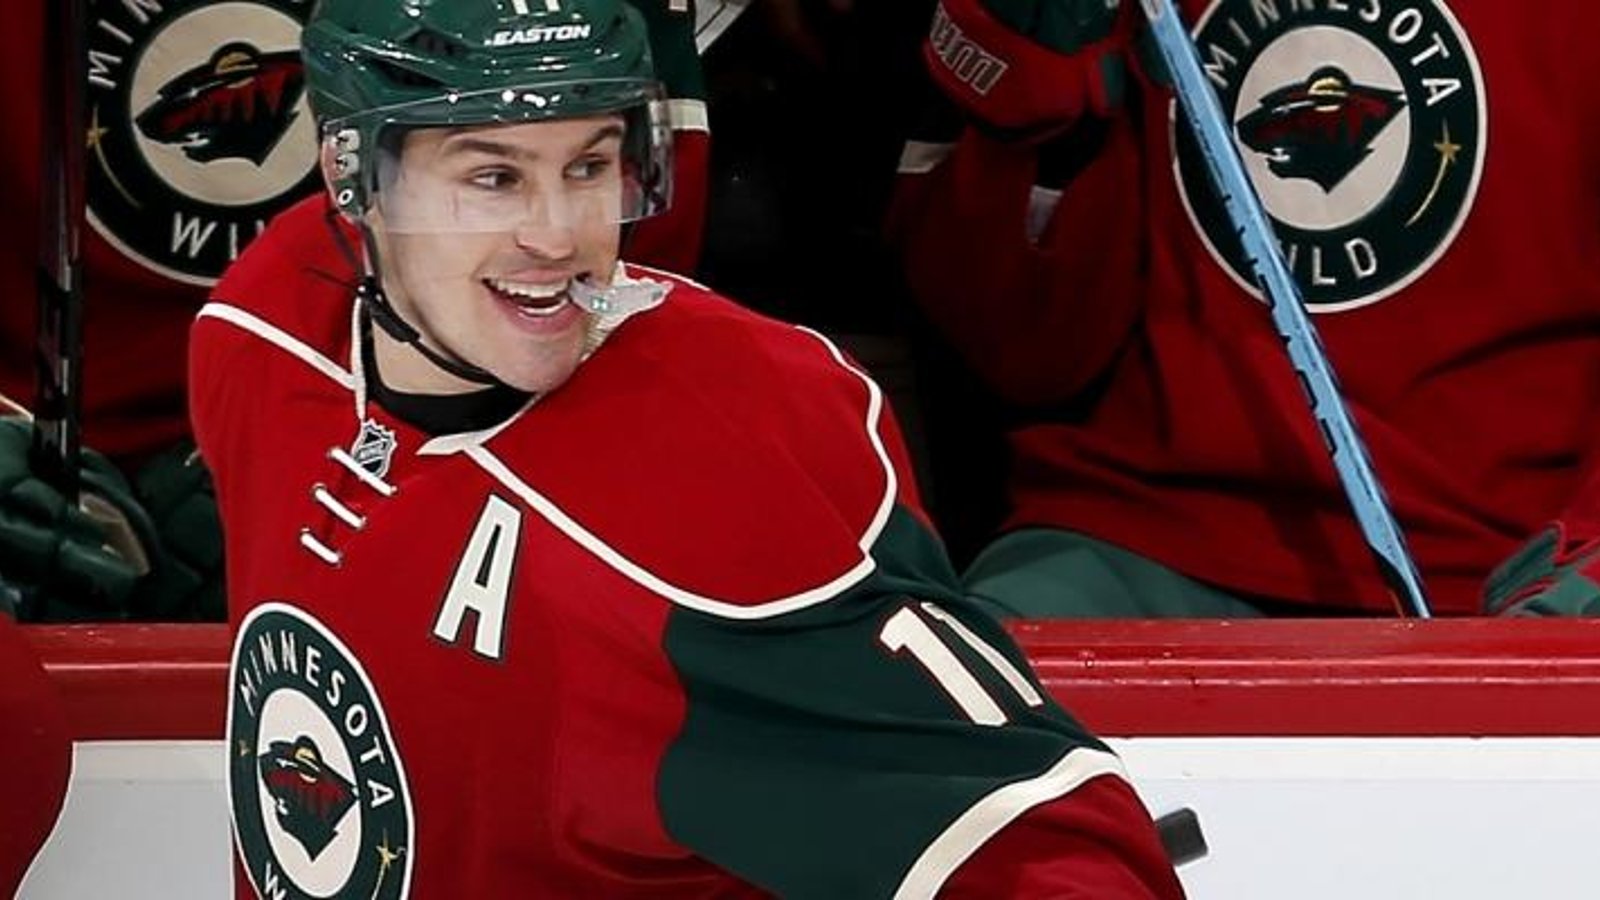 A devastating blow for the Minnesota Wild right before the playoffs.